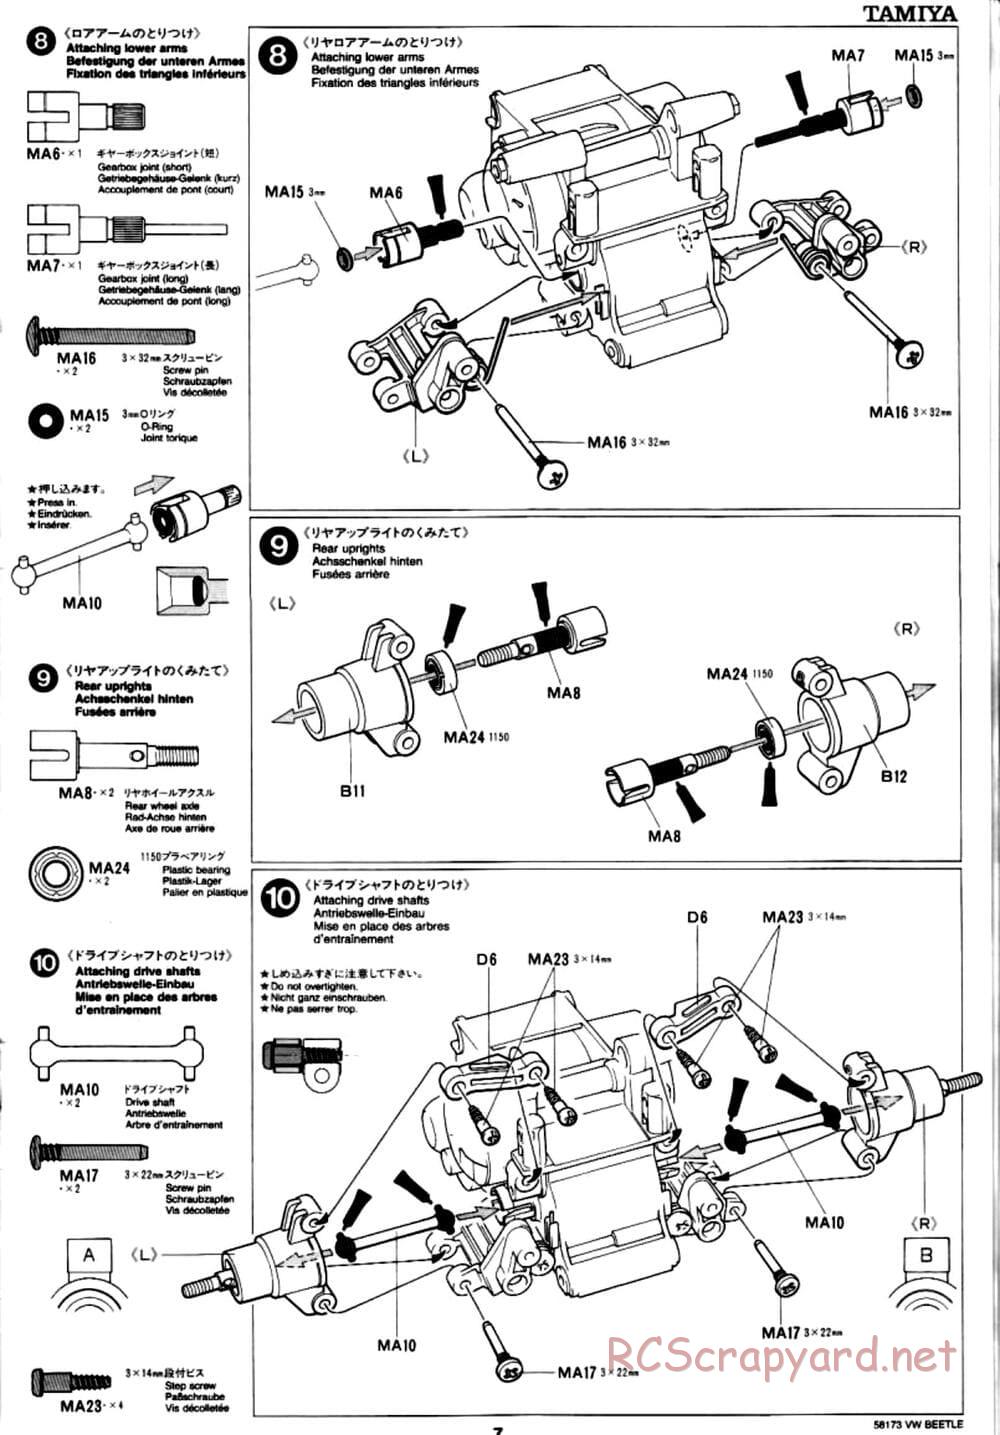 Tamiya - Volkswagen Beetle - M02L Chassis - Manual - Page 7